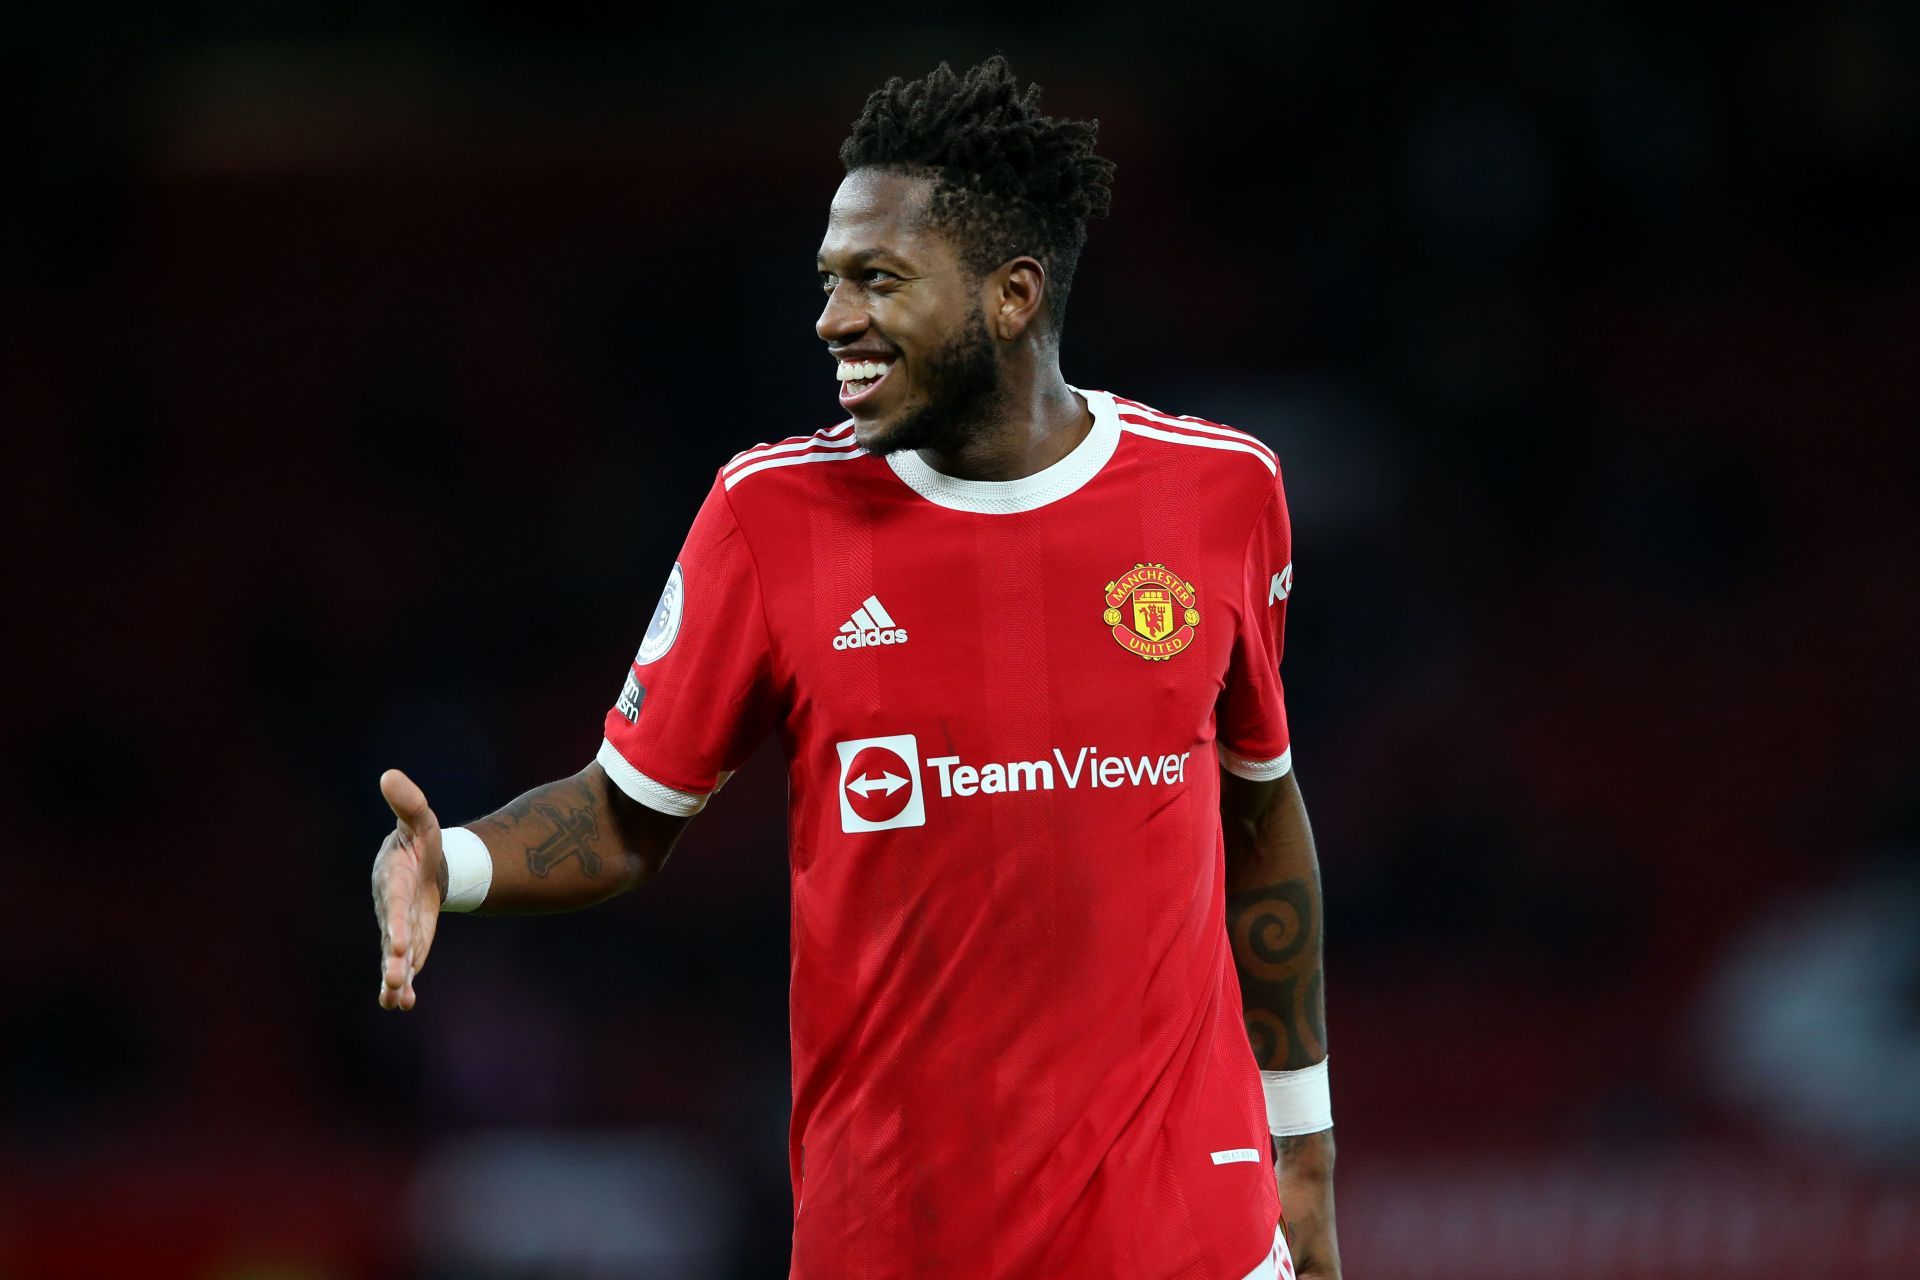 Fred can flourish significantly well under Ralf Rangnick